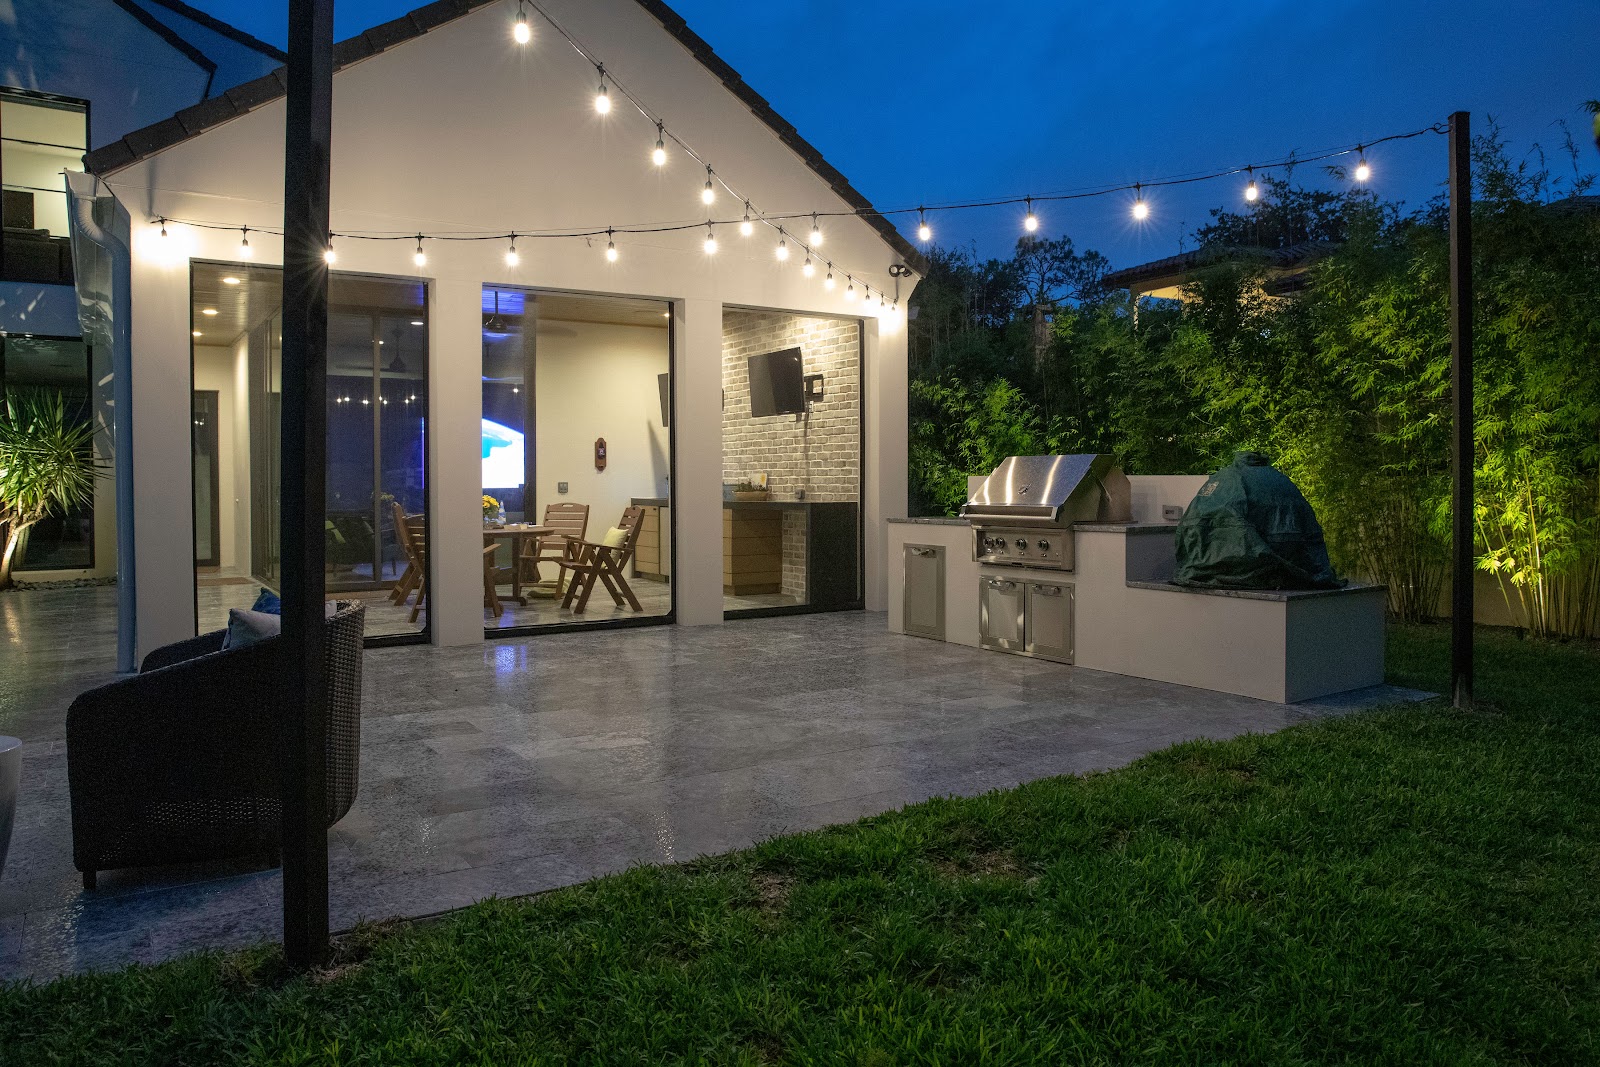 outdoor string lights over patio and grill